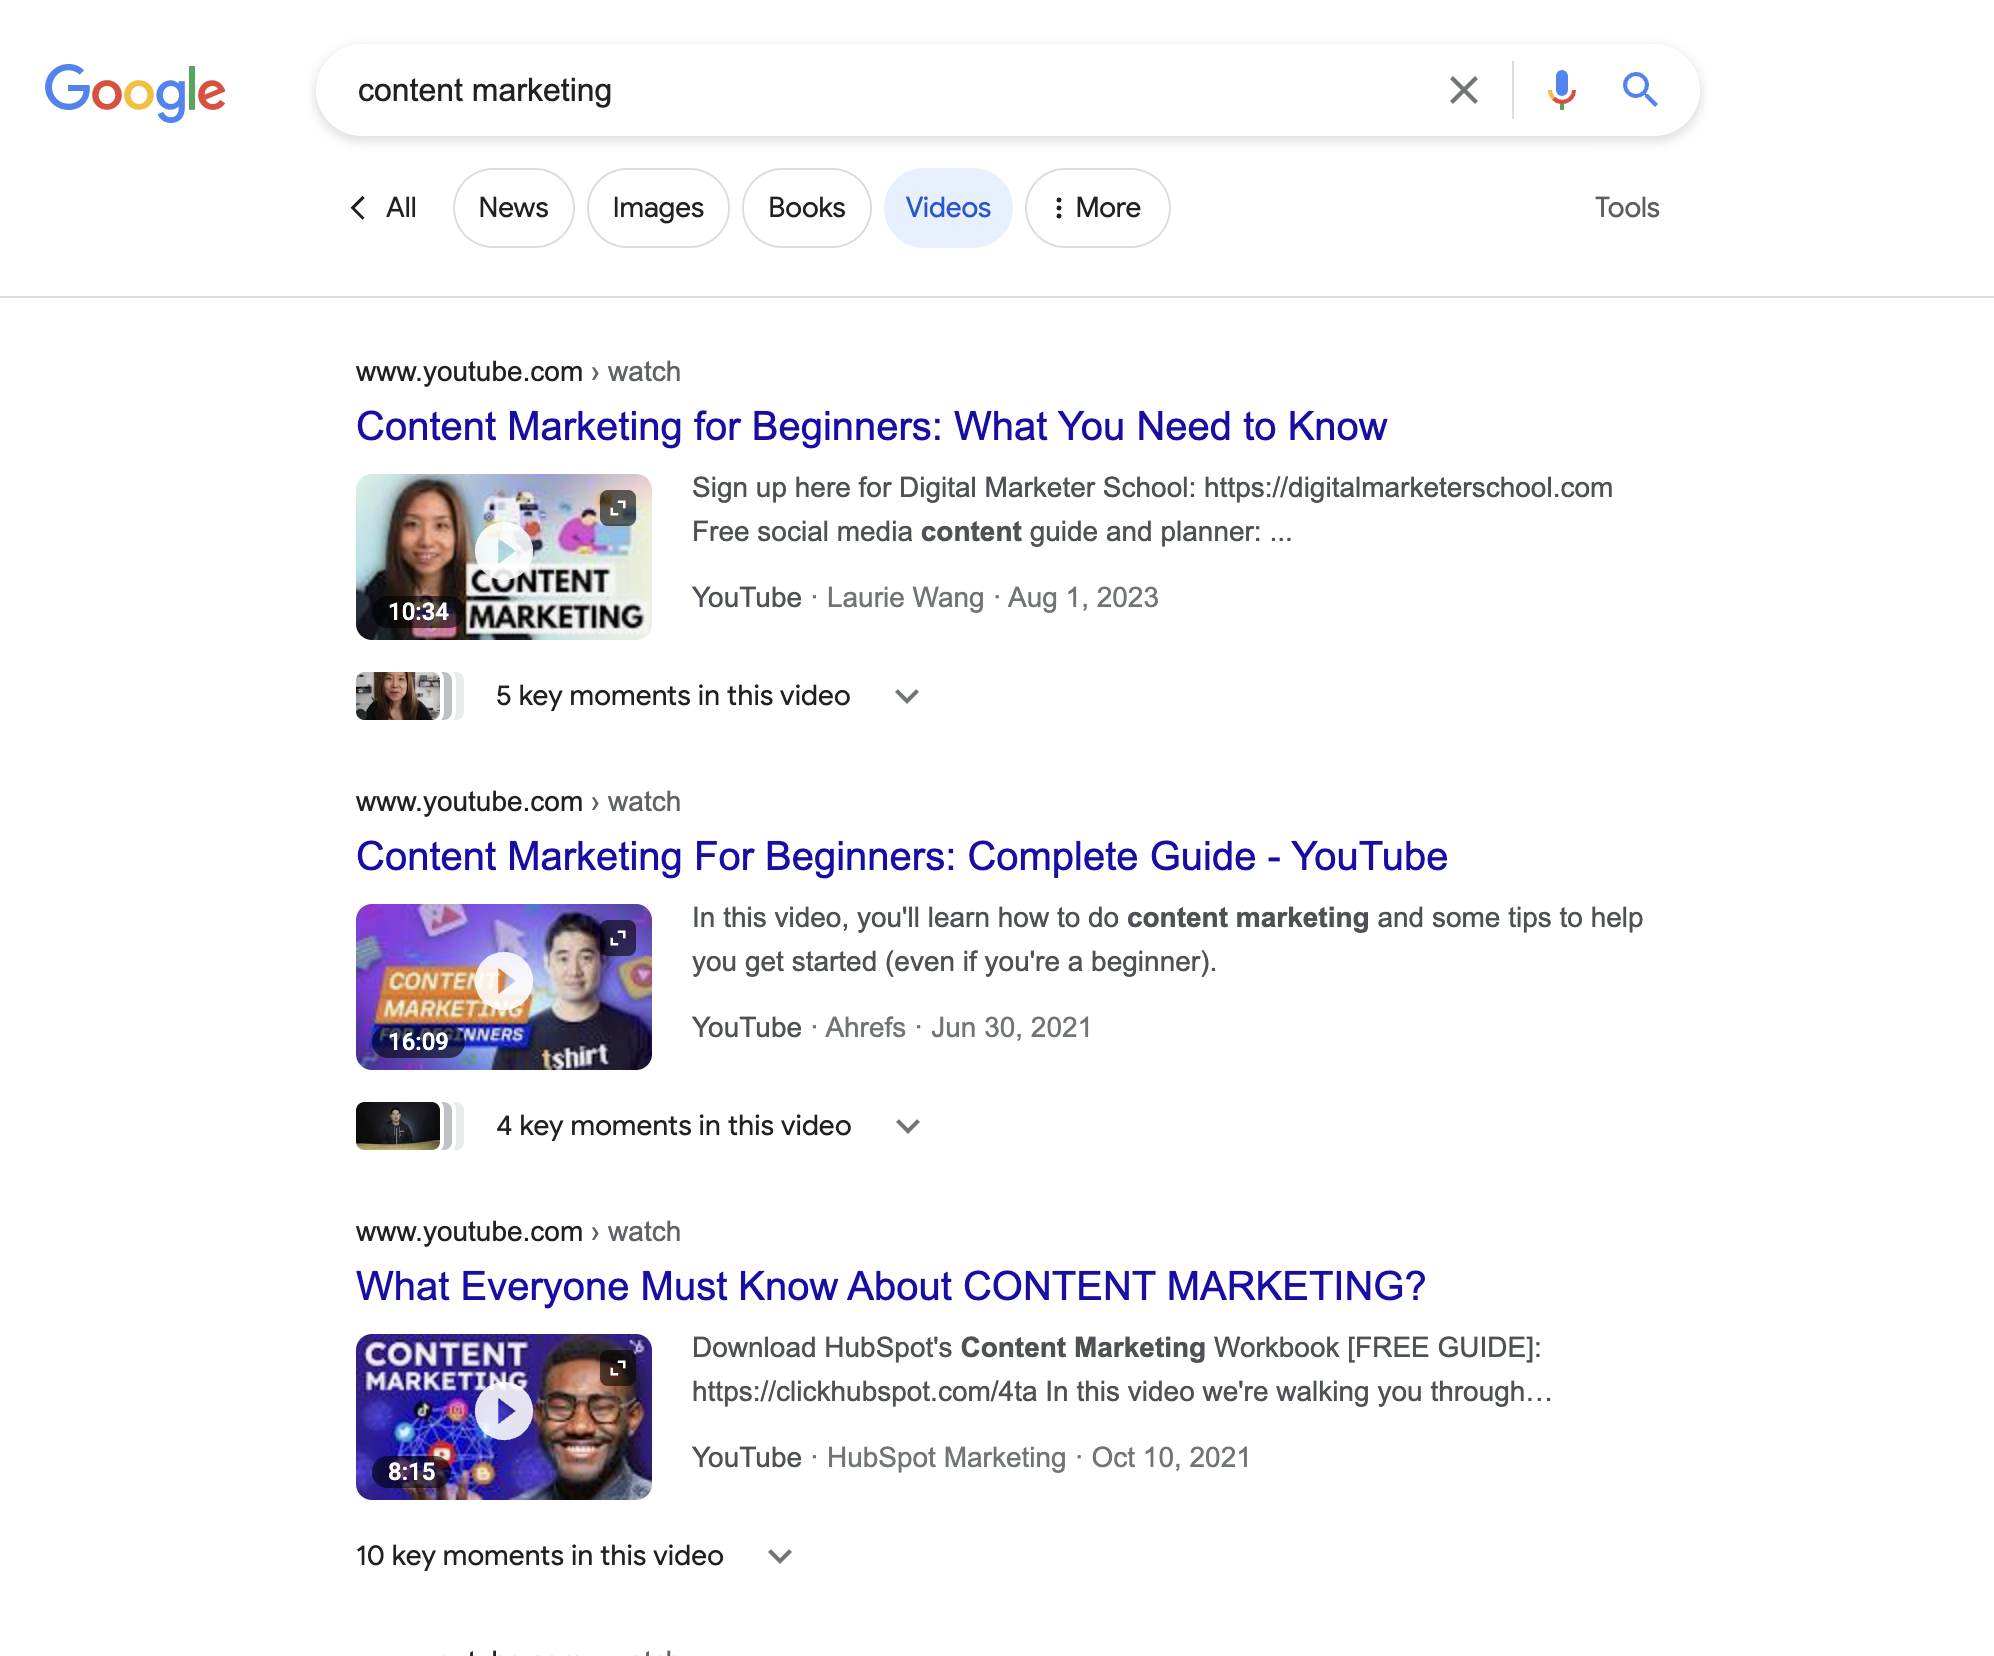  search for [content marketing], Google